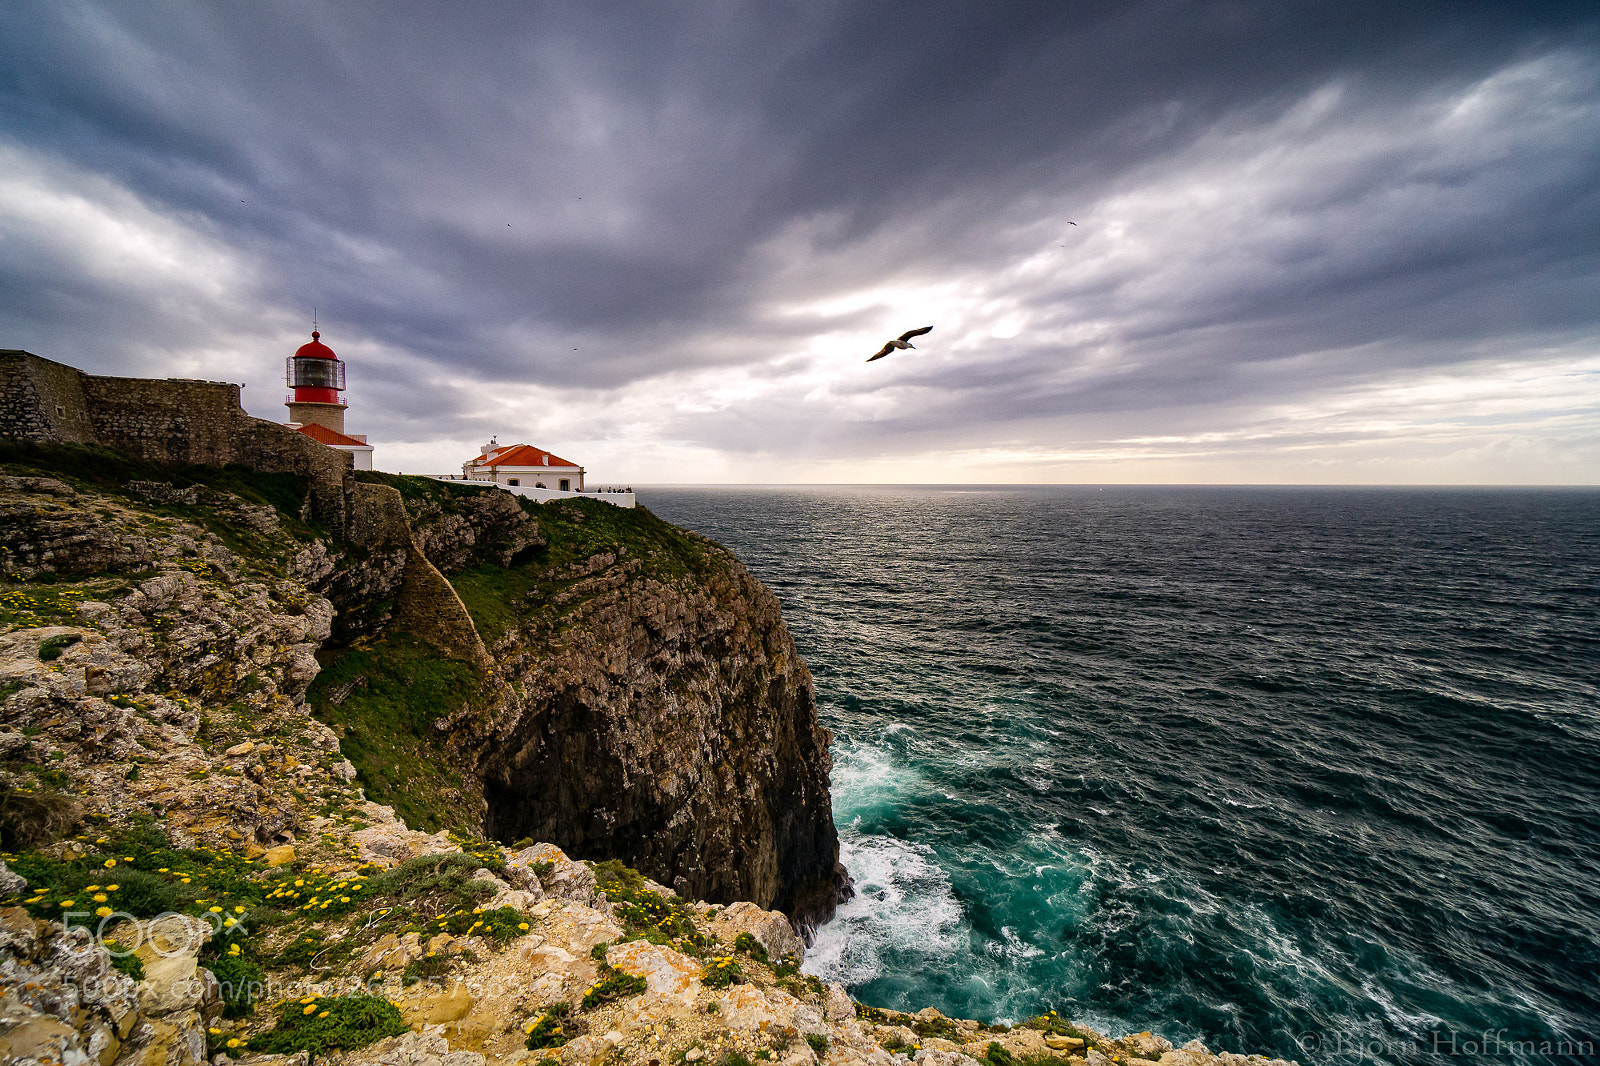 Sony a6000 sample photo. Last lighthouse of europe photography